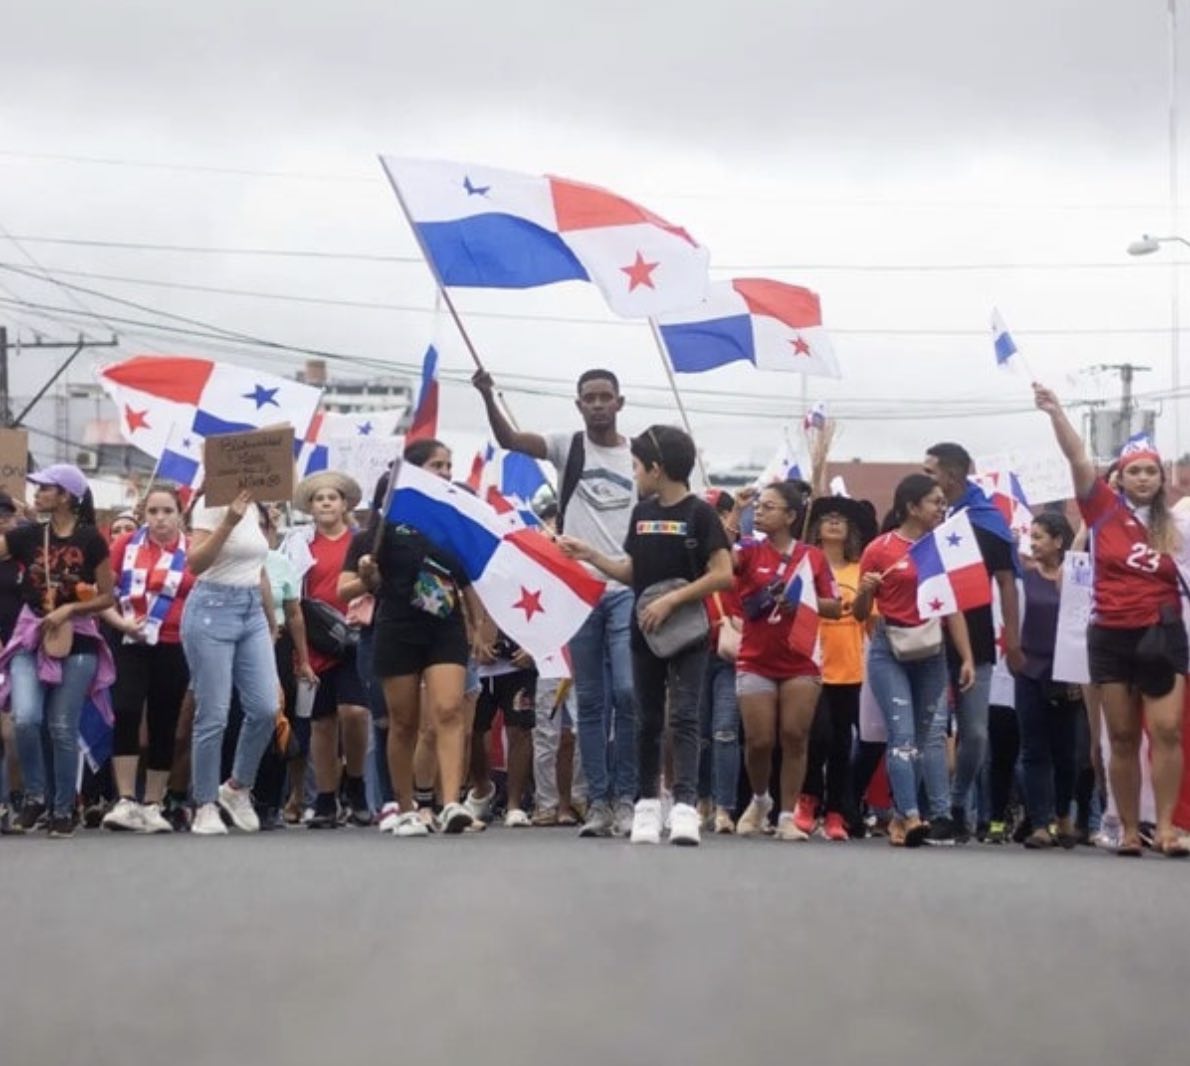 Protesters of all ages march towards the camera waving Panamanian flags